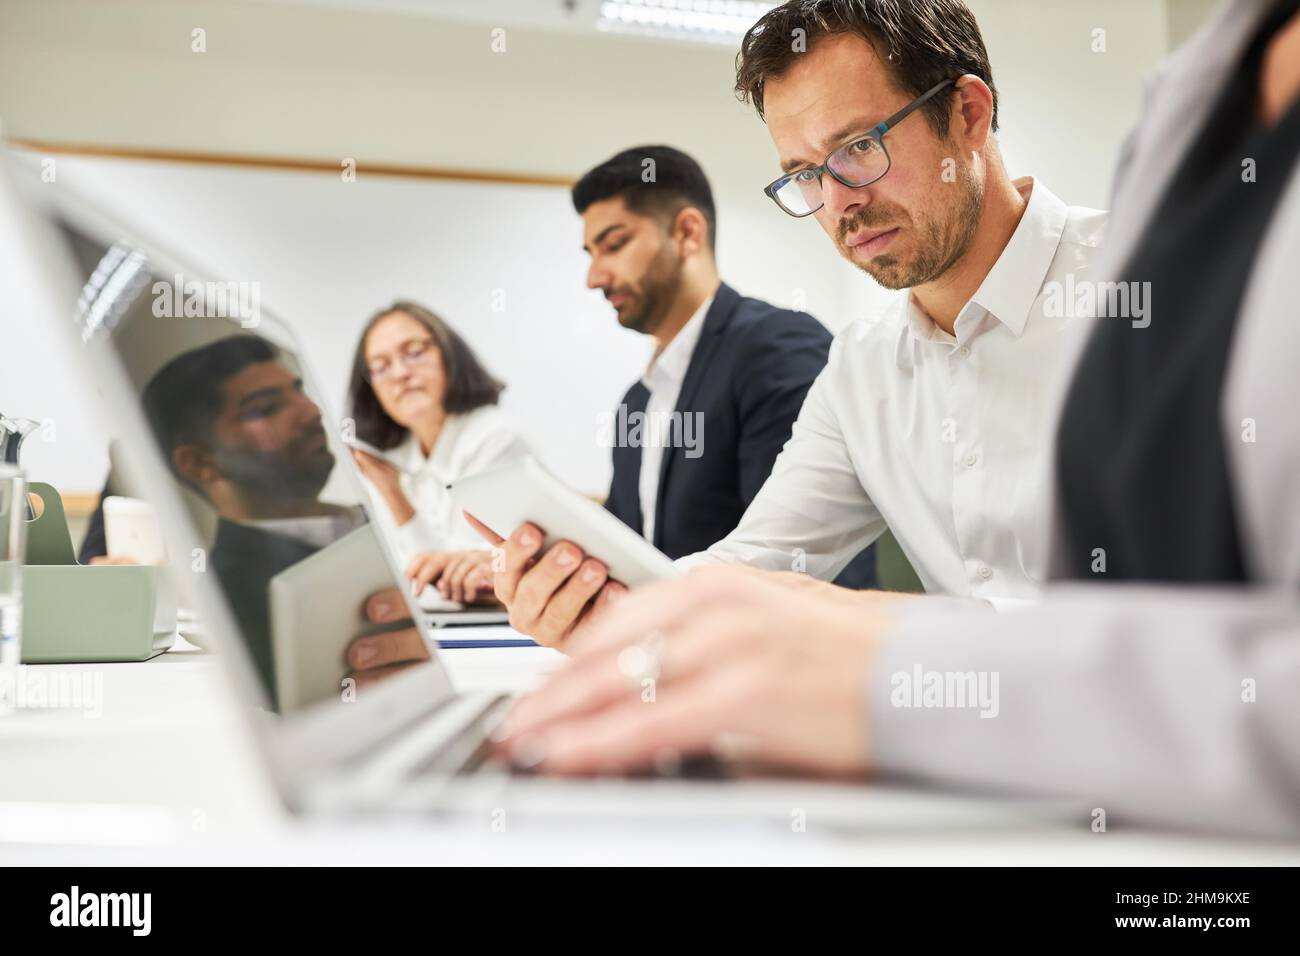 Business people work together in computer workshop or computer training Stock Photo